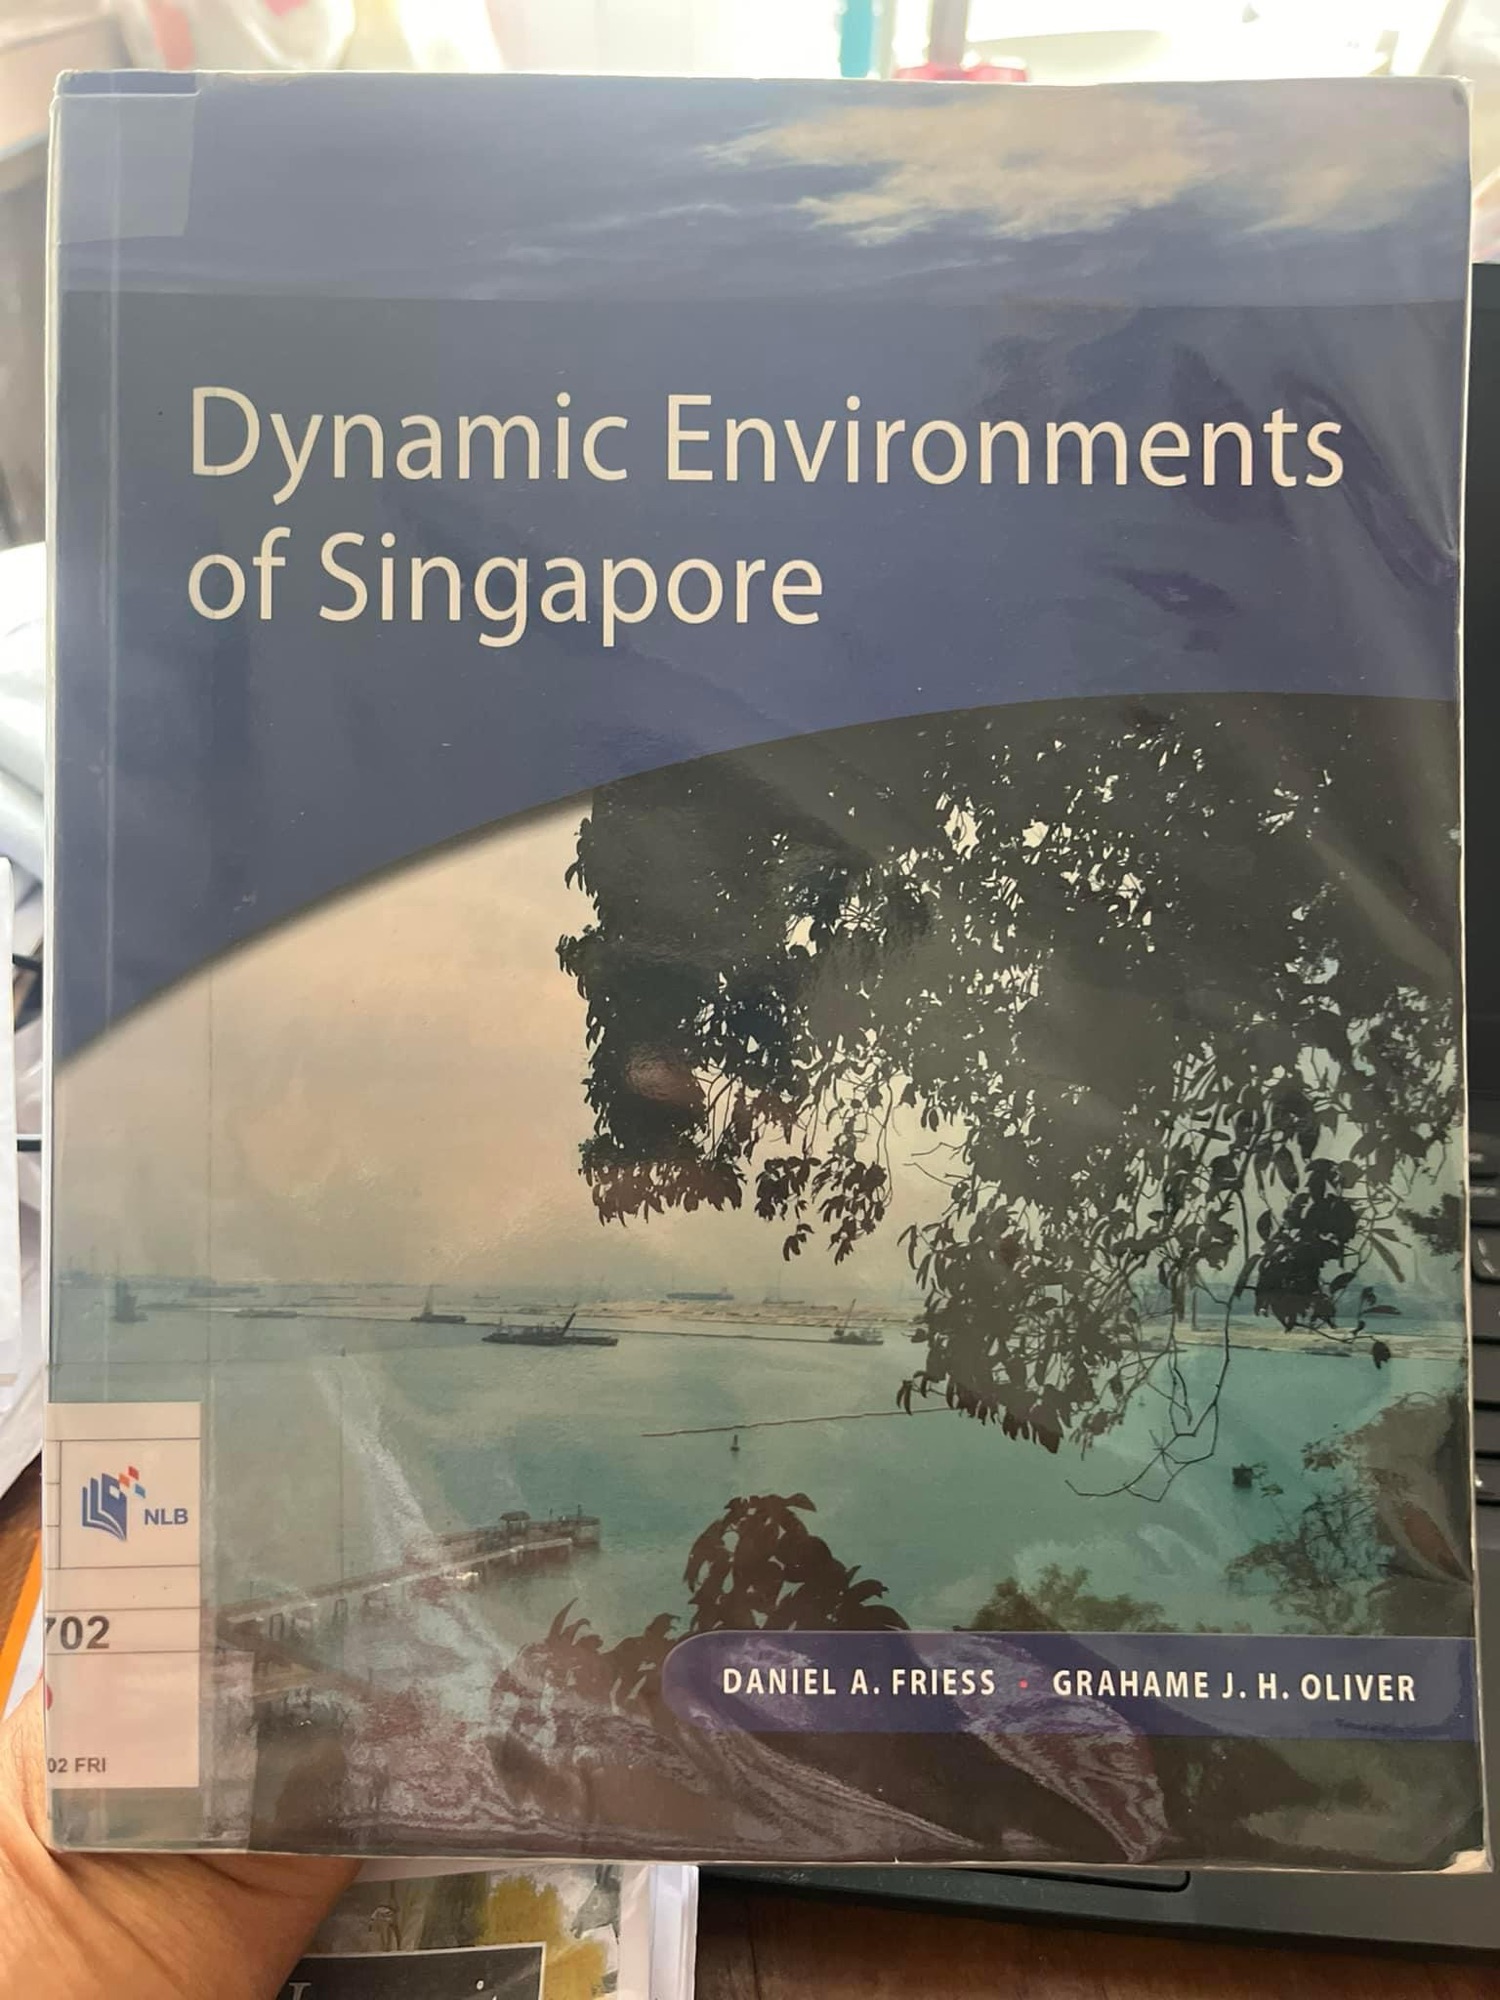 Book highlights: “Dynamic Environments of Singapore”